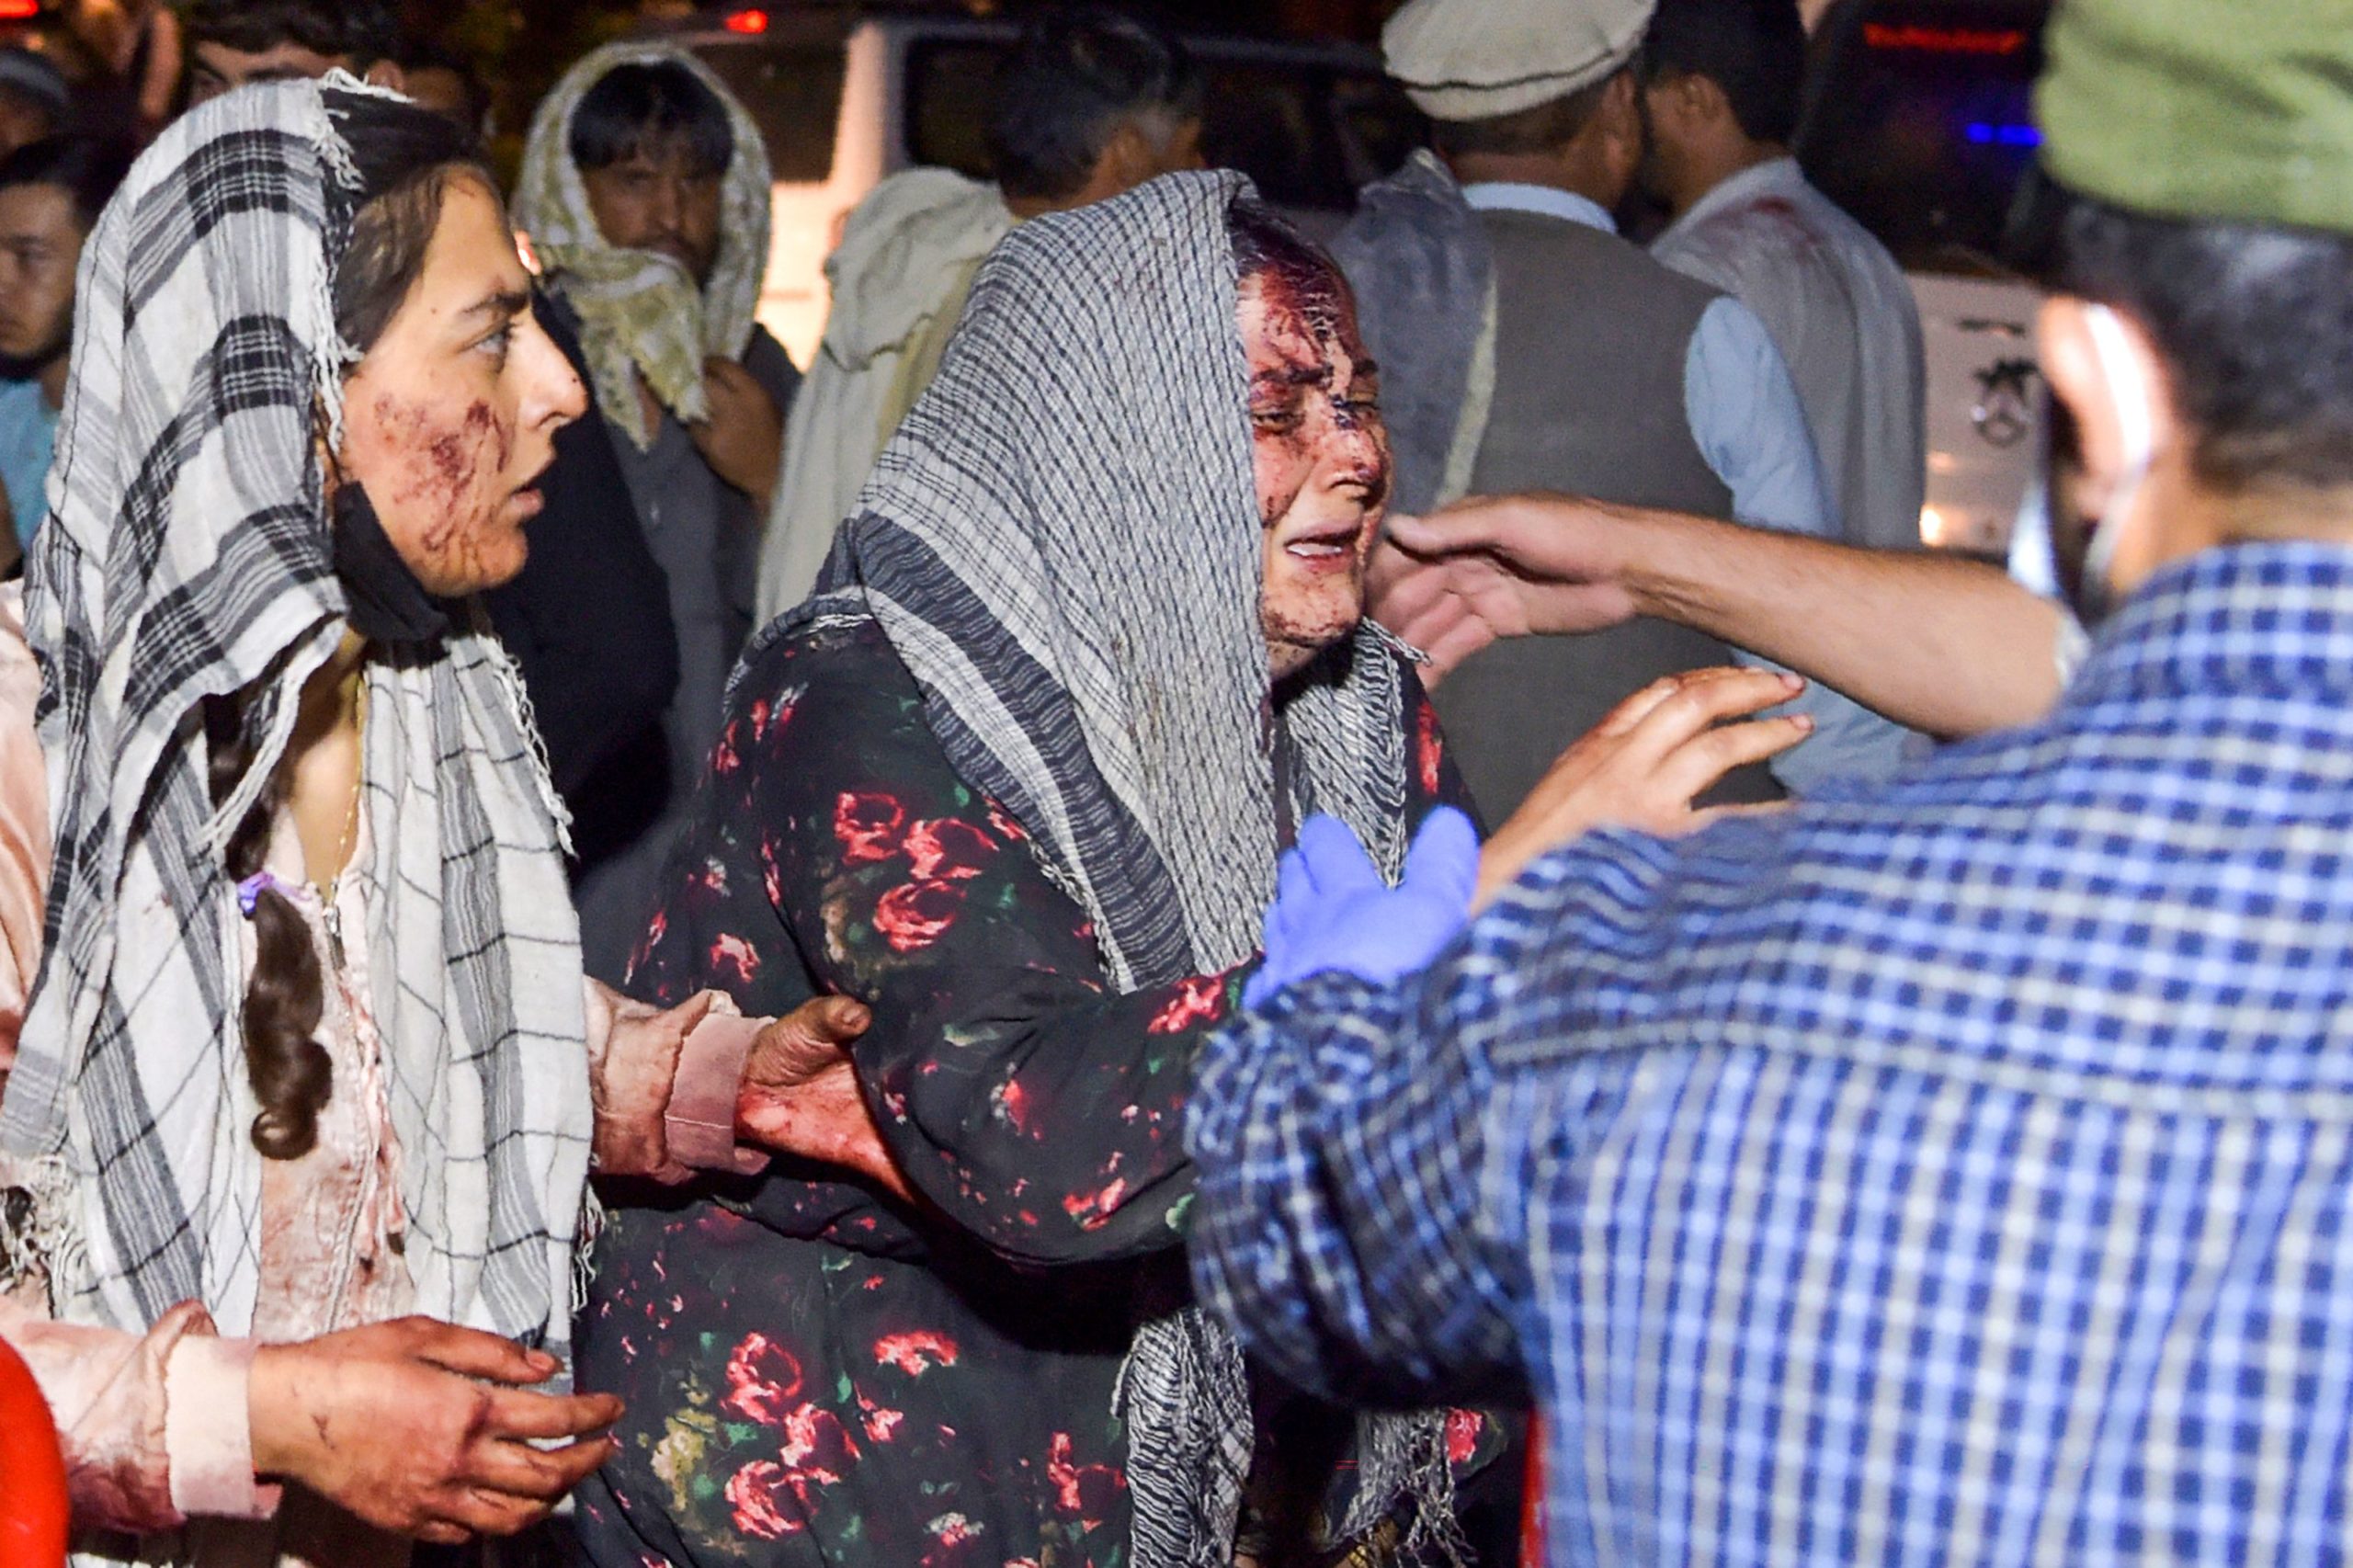 EDITORS NOTE: Graphic content / TOPSHOT - Wounded women arrive at a hospital for treatment after two blasts, which killed at least five and wounded a dozen, outside the airport in Kabul on August 26, 2021. (Photo by Wakil KOHSAR / AFP) (Photo by WAKIL KOHSAR/AFP via Getty Images)